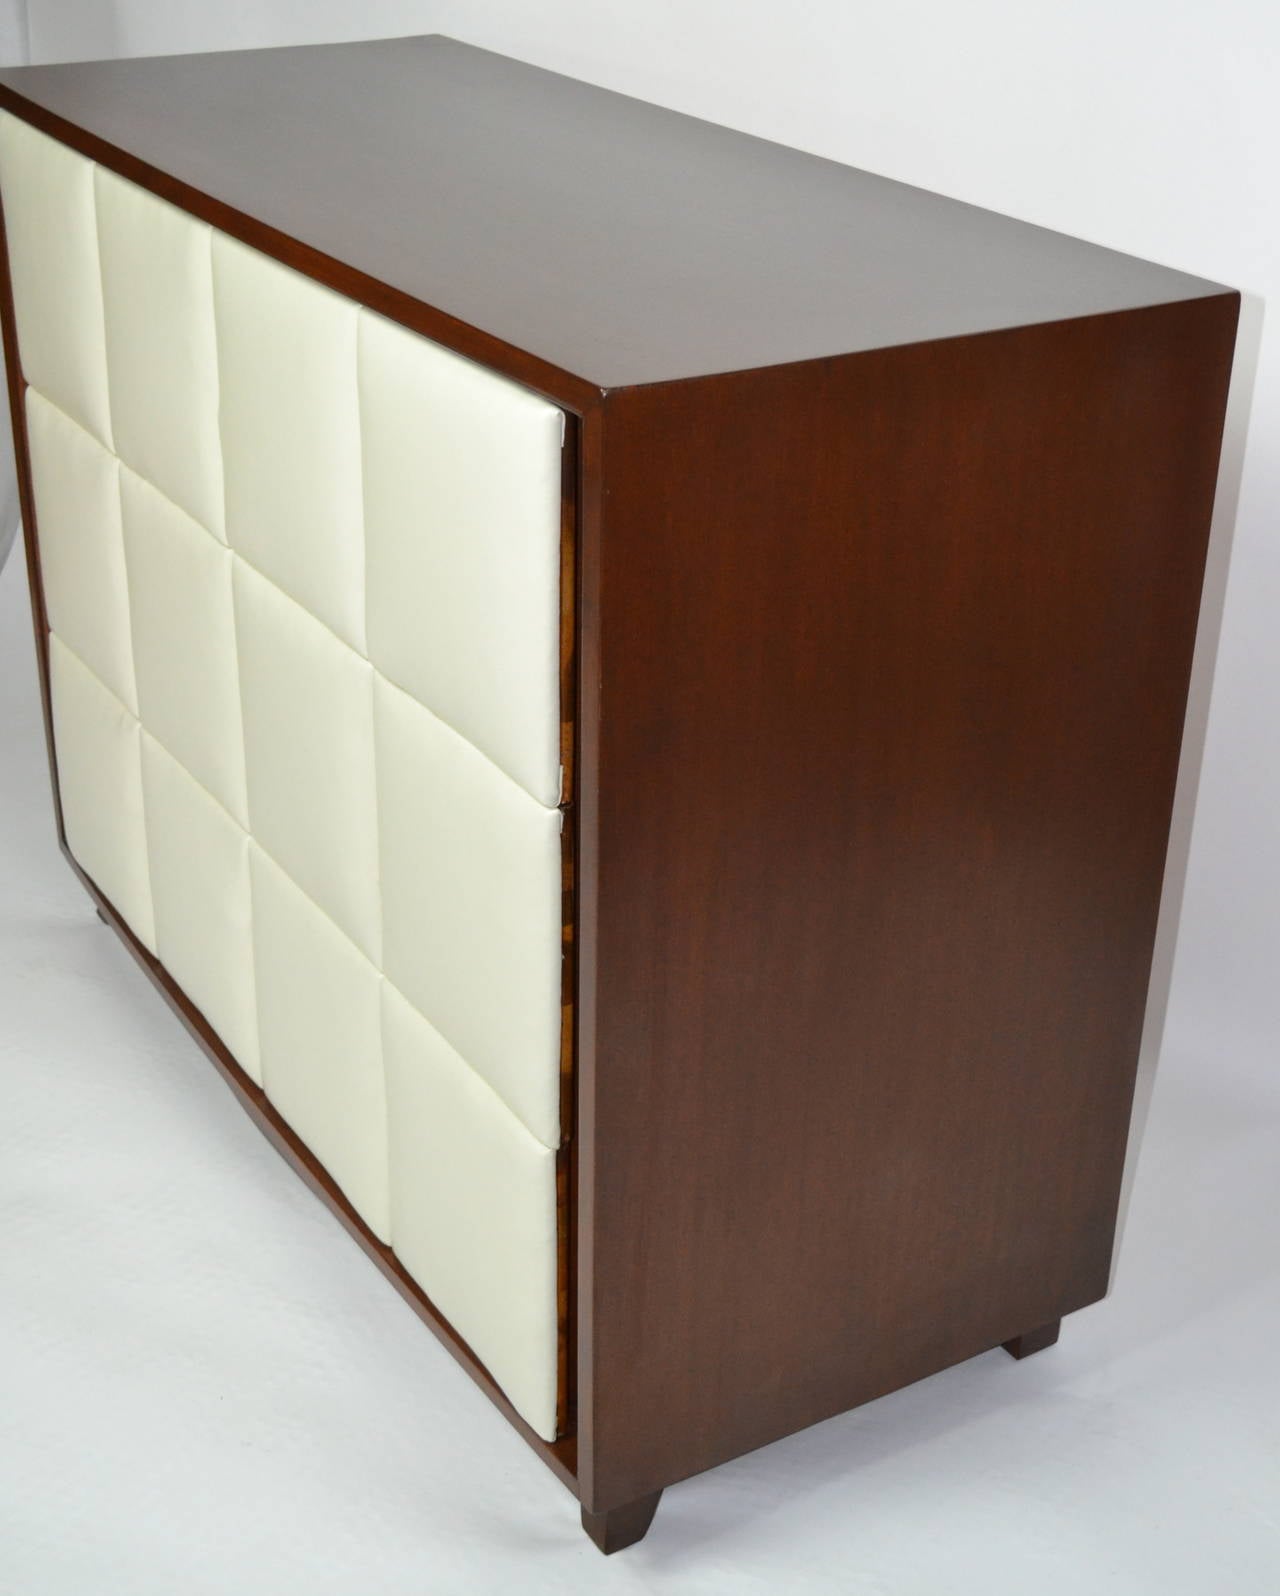 American Gilbert Rohde Three-Drawer Chest for Herman Miller, circa 1940